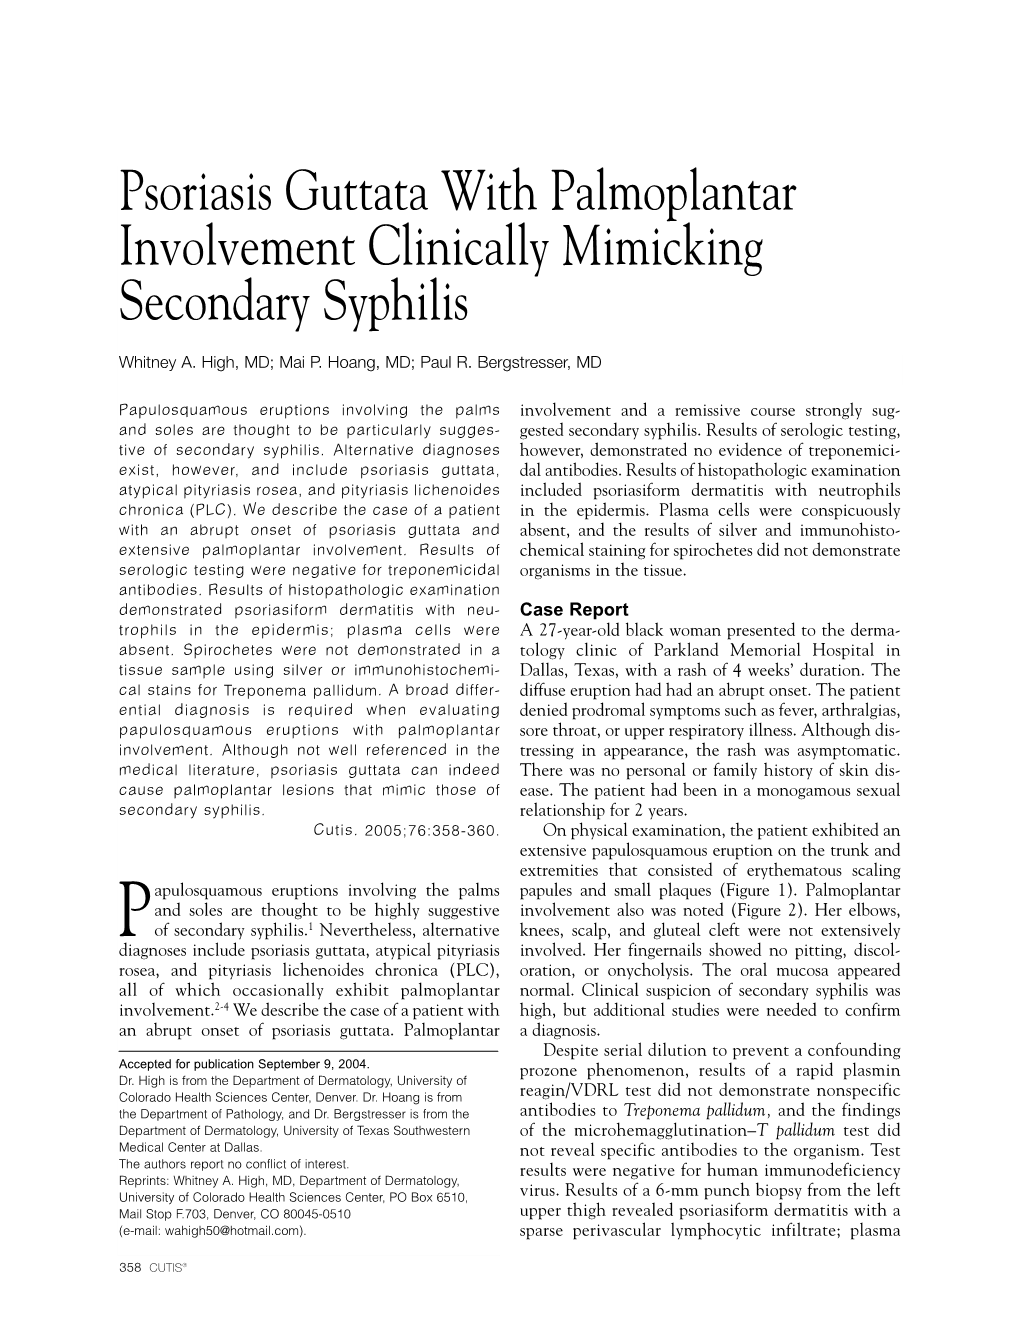 Psoriasis Guttata with Palmoplantar Involvement Clinically Mimicking Secondary Syphilis